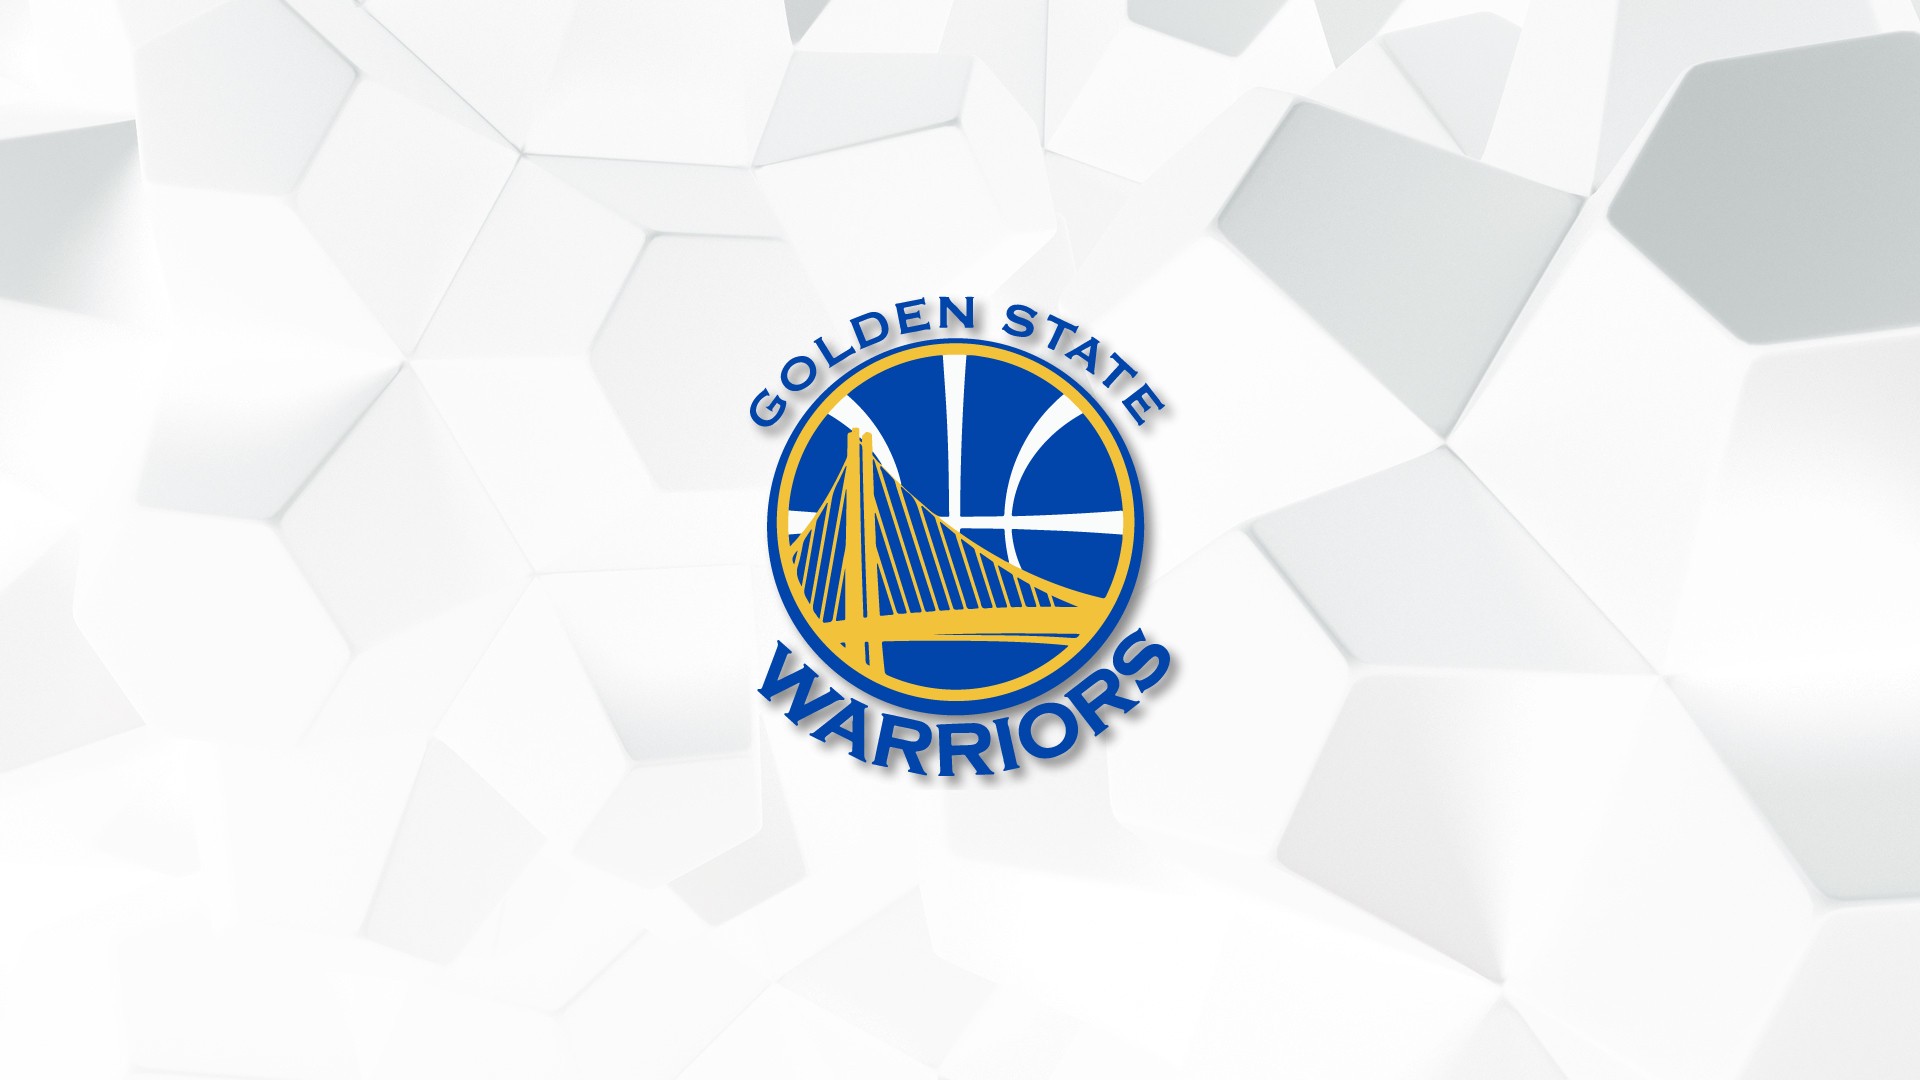 Golden State Warriors Background Wallpaper HD with image resolution 1920x1080 pixel. You can make this wallpaper for your Desktop Computer Backgrounds, Mac Wallpapers, Android Lock screen or iPhone Screensavers